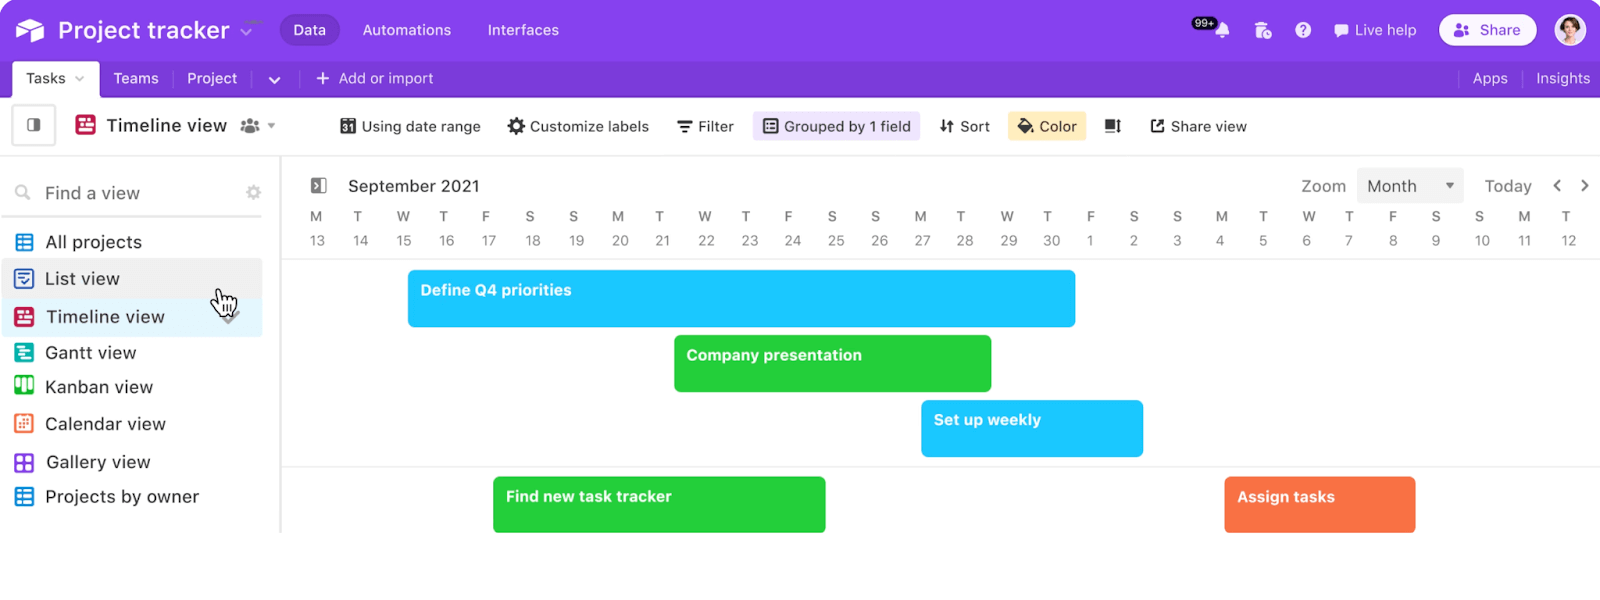 A screenshot of a project tracker in Airtable.